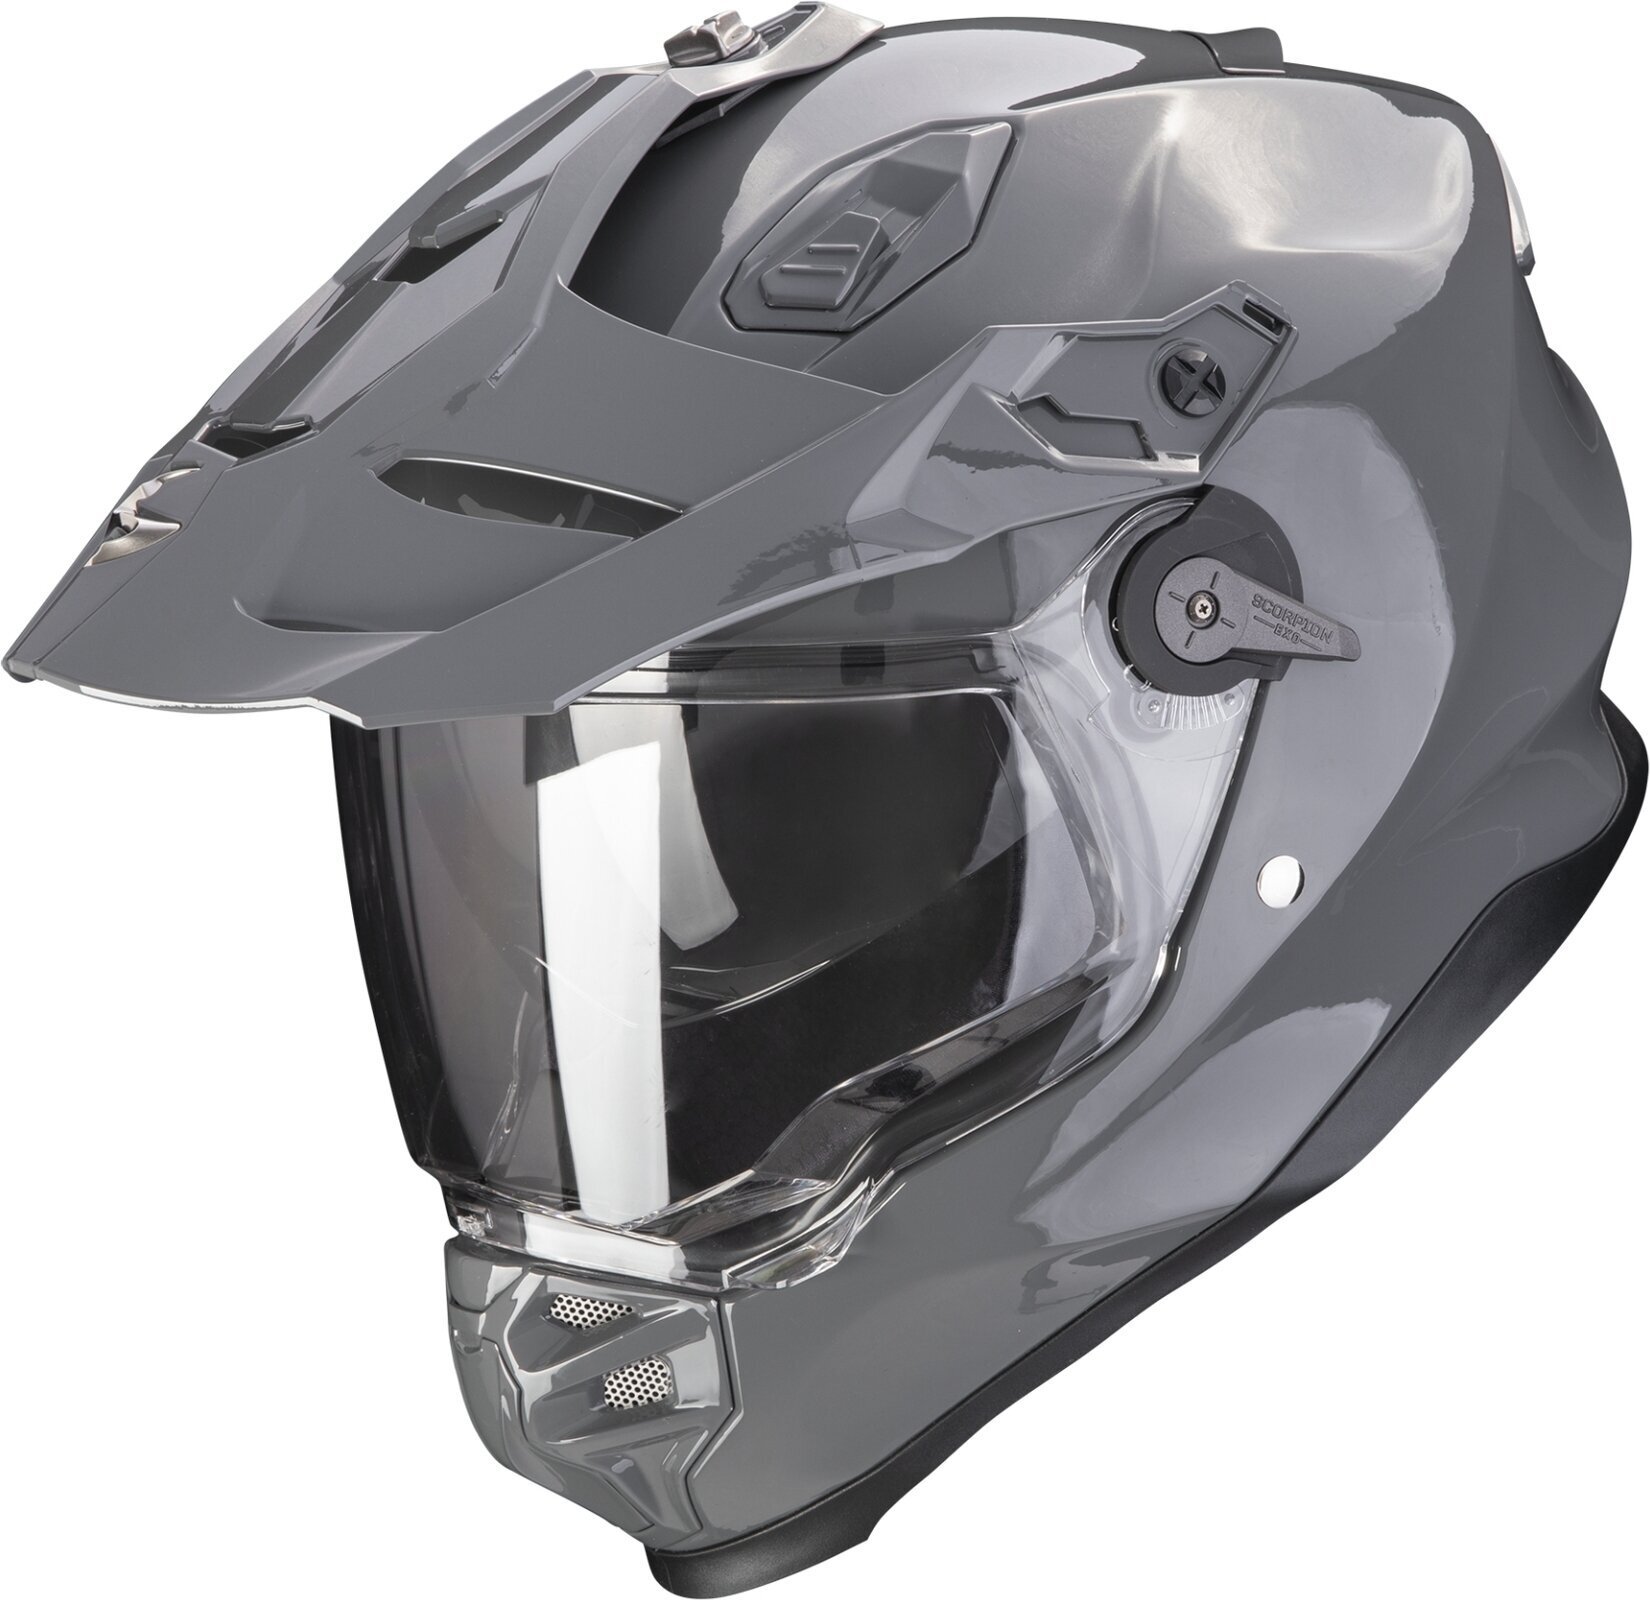 Kask Scorpion ADF-9000 AIR SOLID Cement Grey S Kask